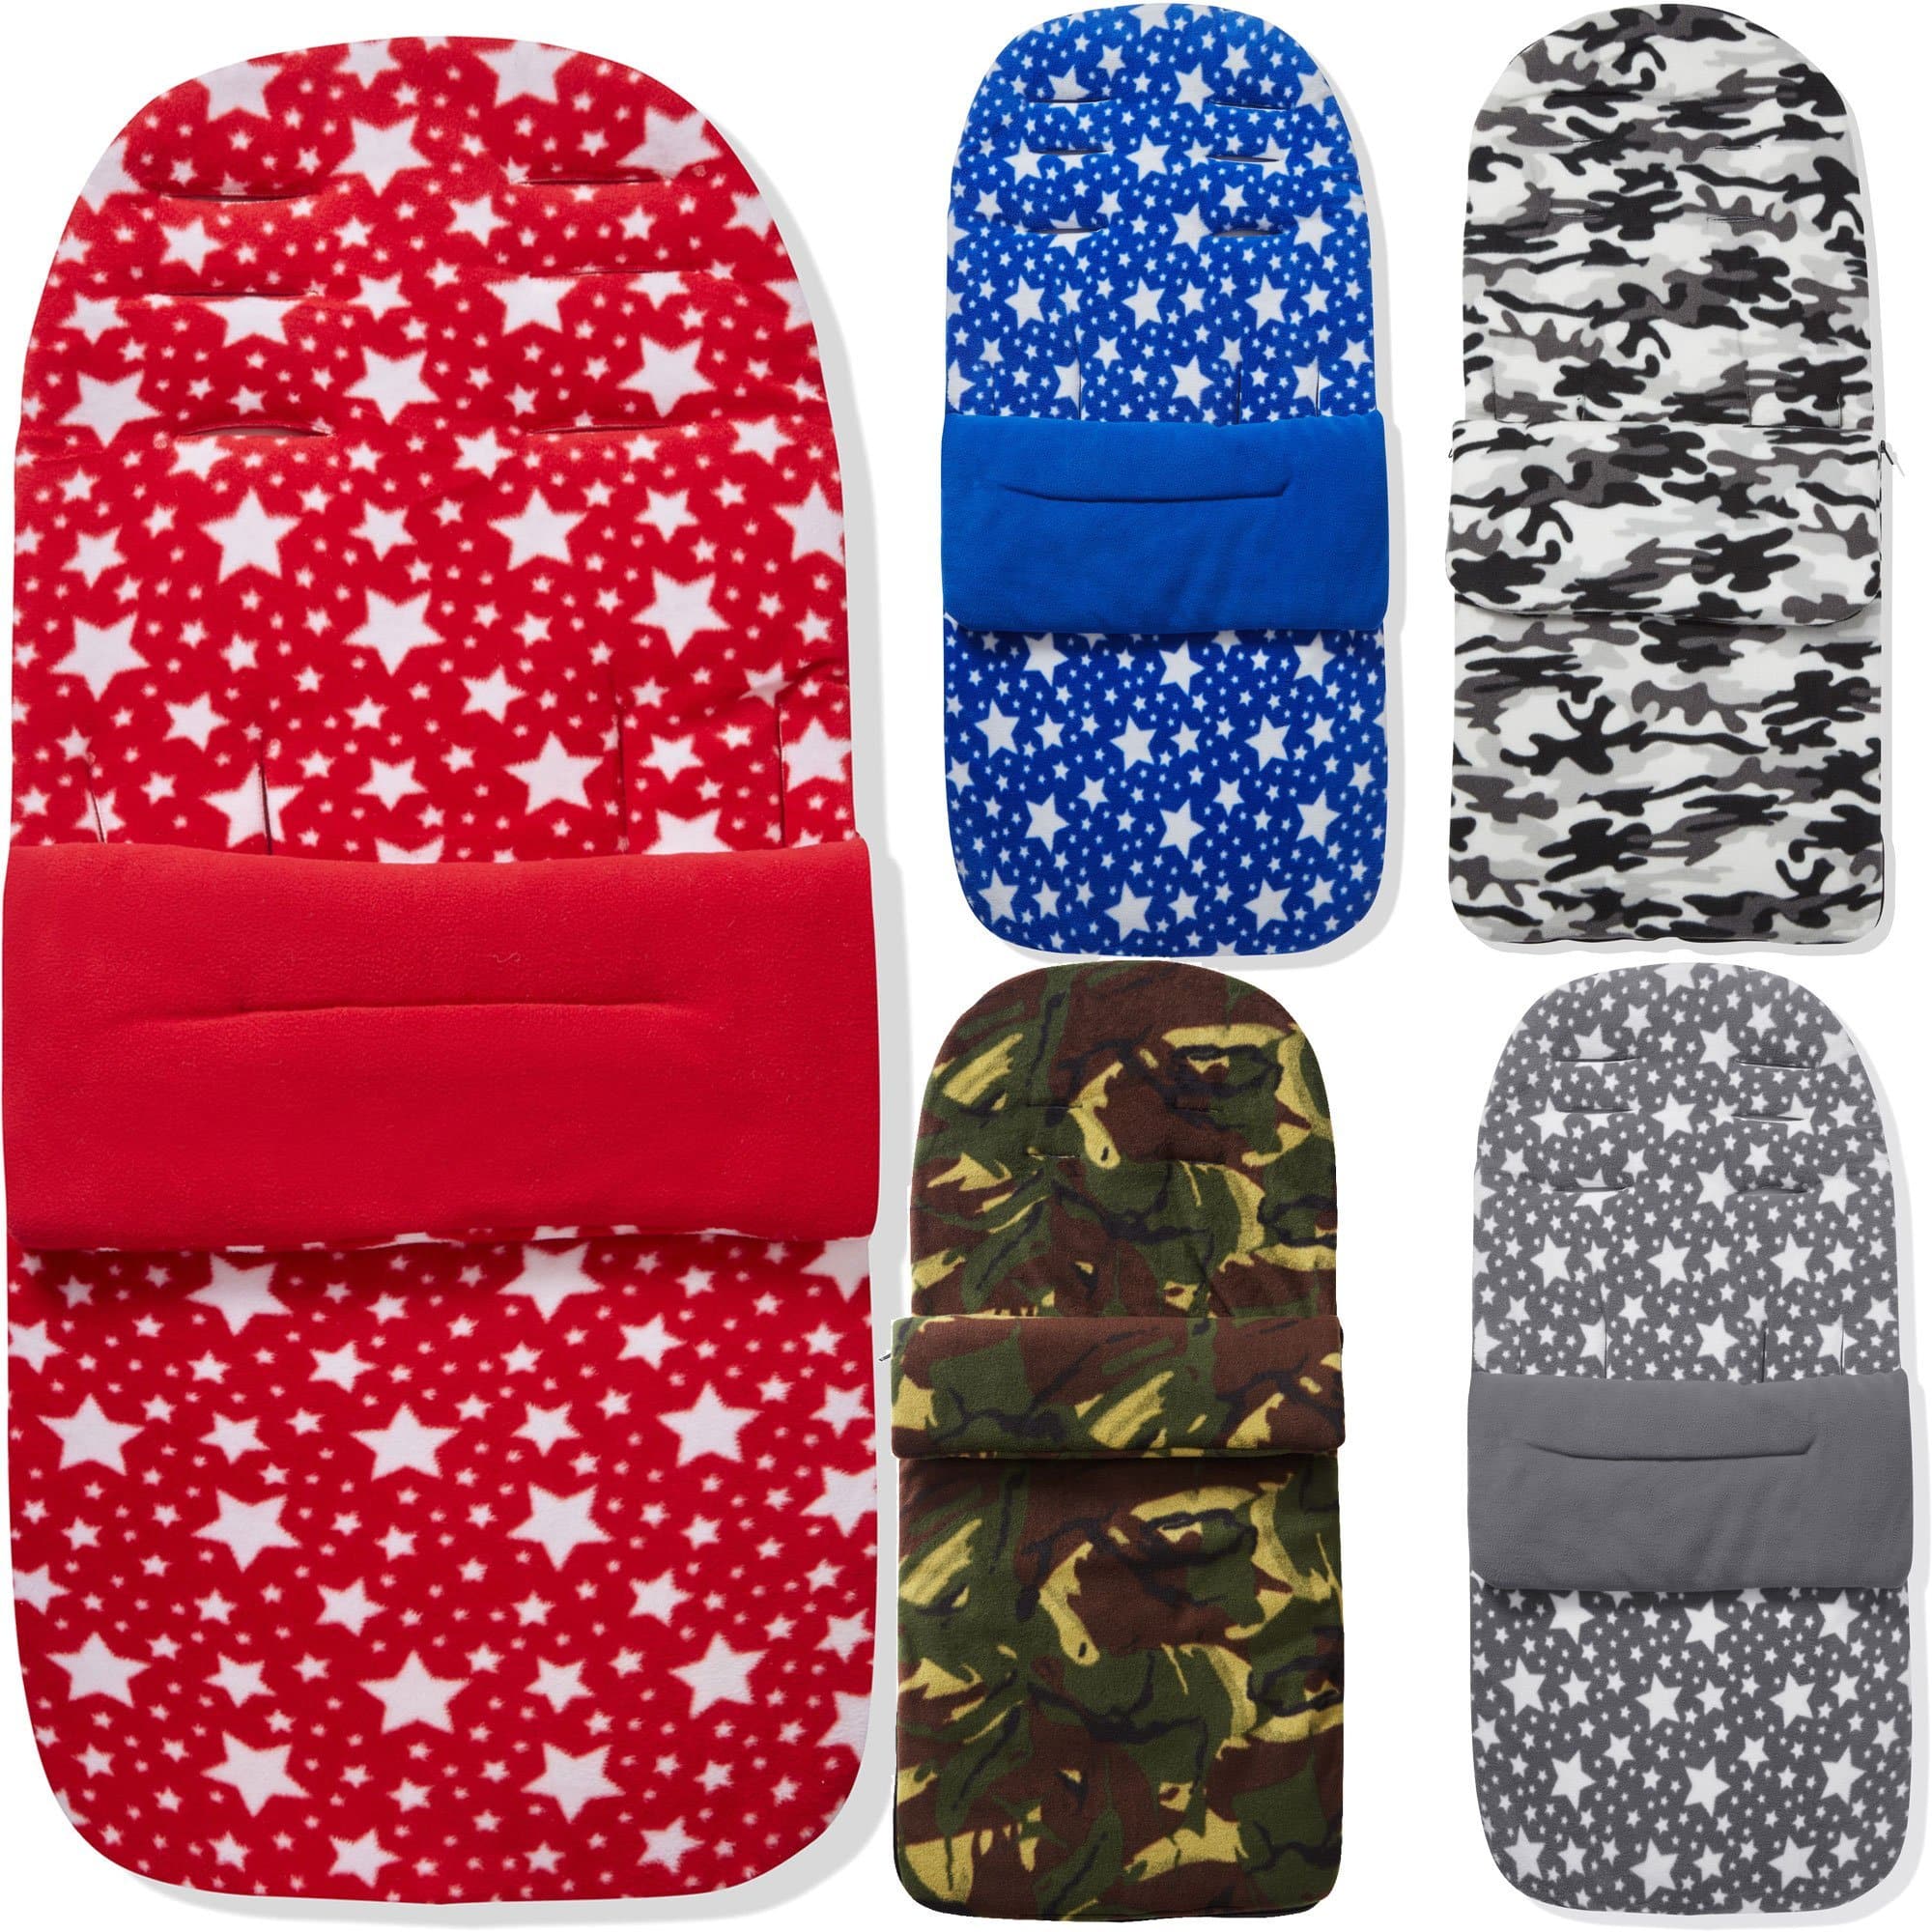 Fleece Footmuff / Cosy Toes Compatible with Inglesina -  | For Your Little One